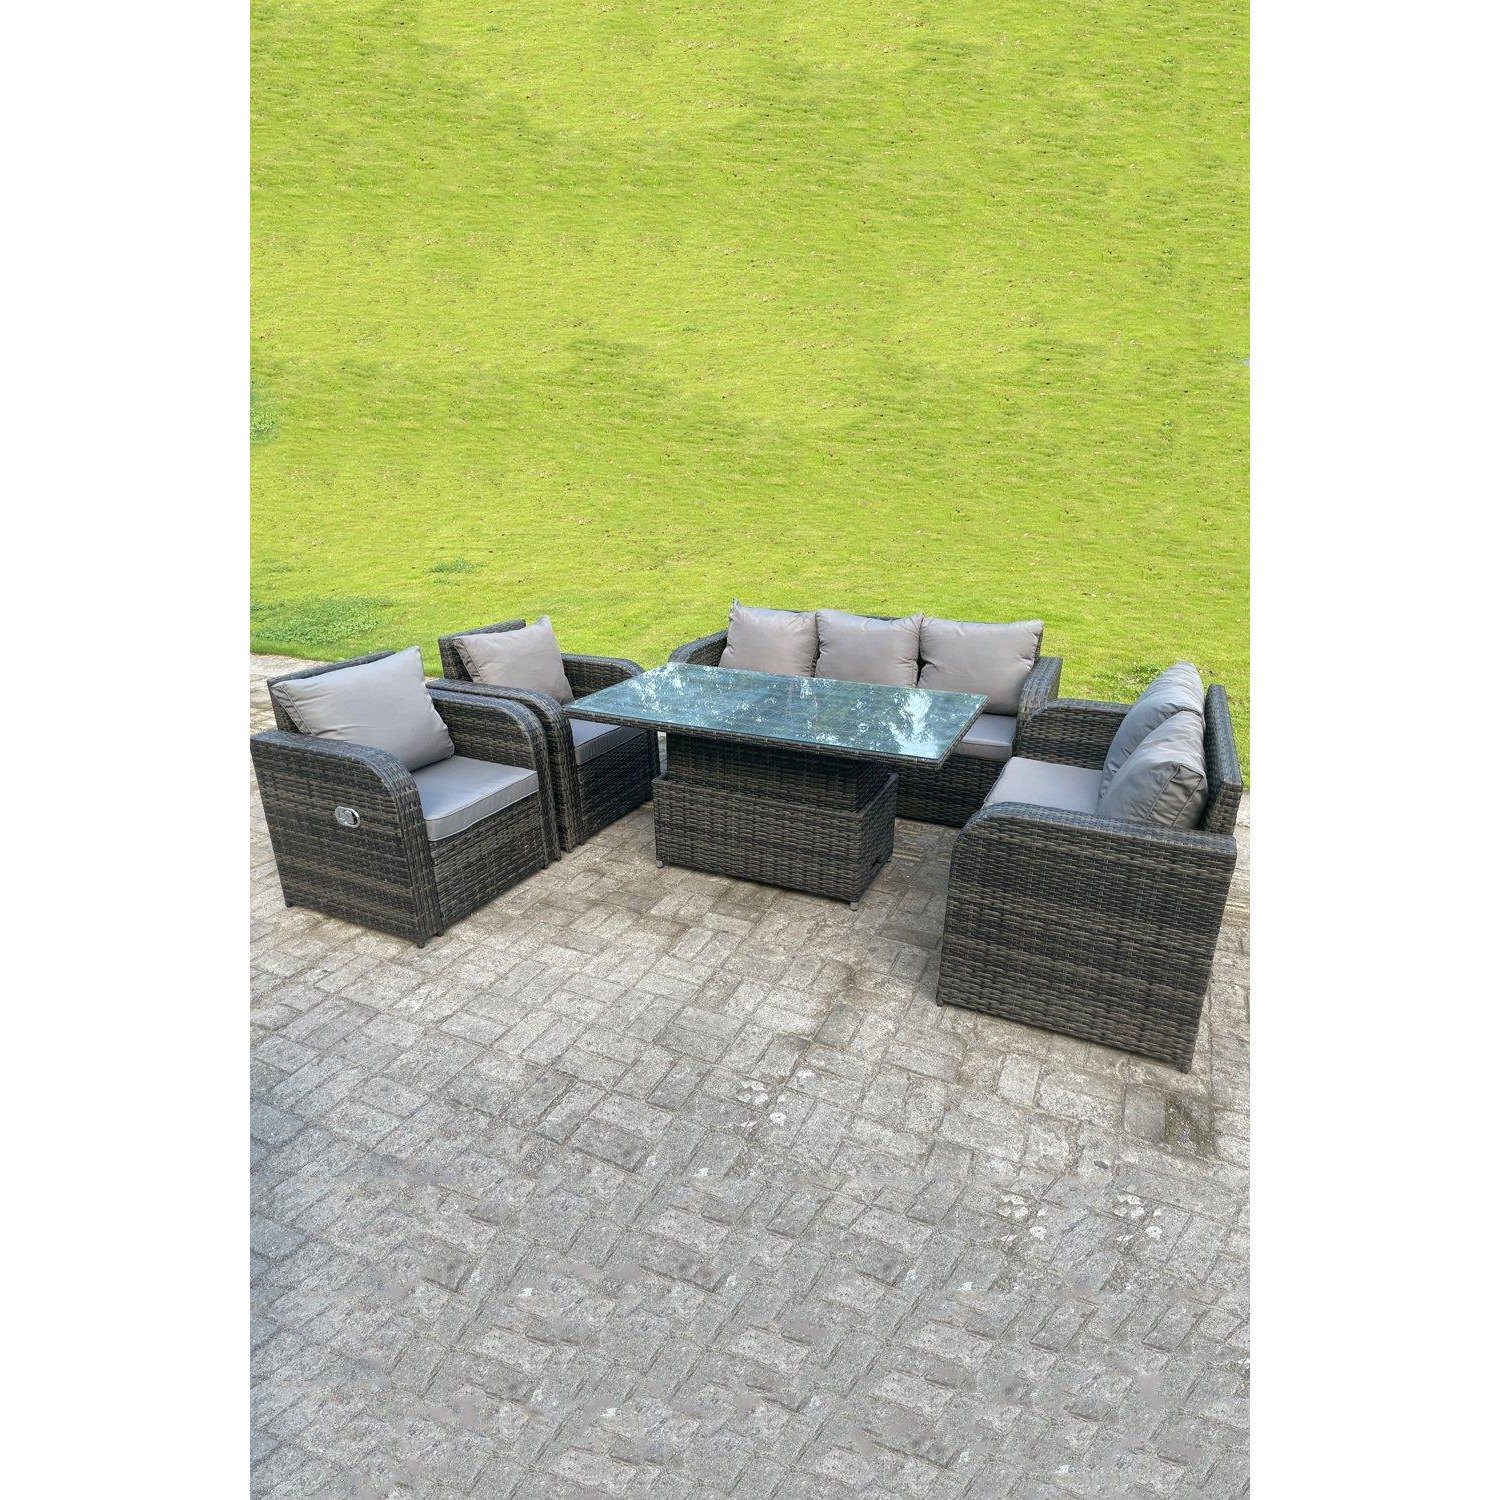 Rattan Outdoor Lifting Adjustable Dining Coffee Table Sets Love Sofa 3 Seater Sofa Reclining Chairs - image 1